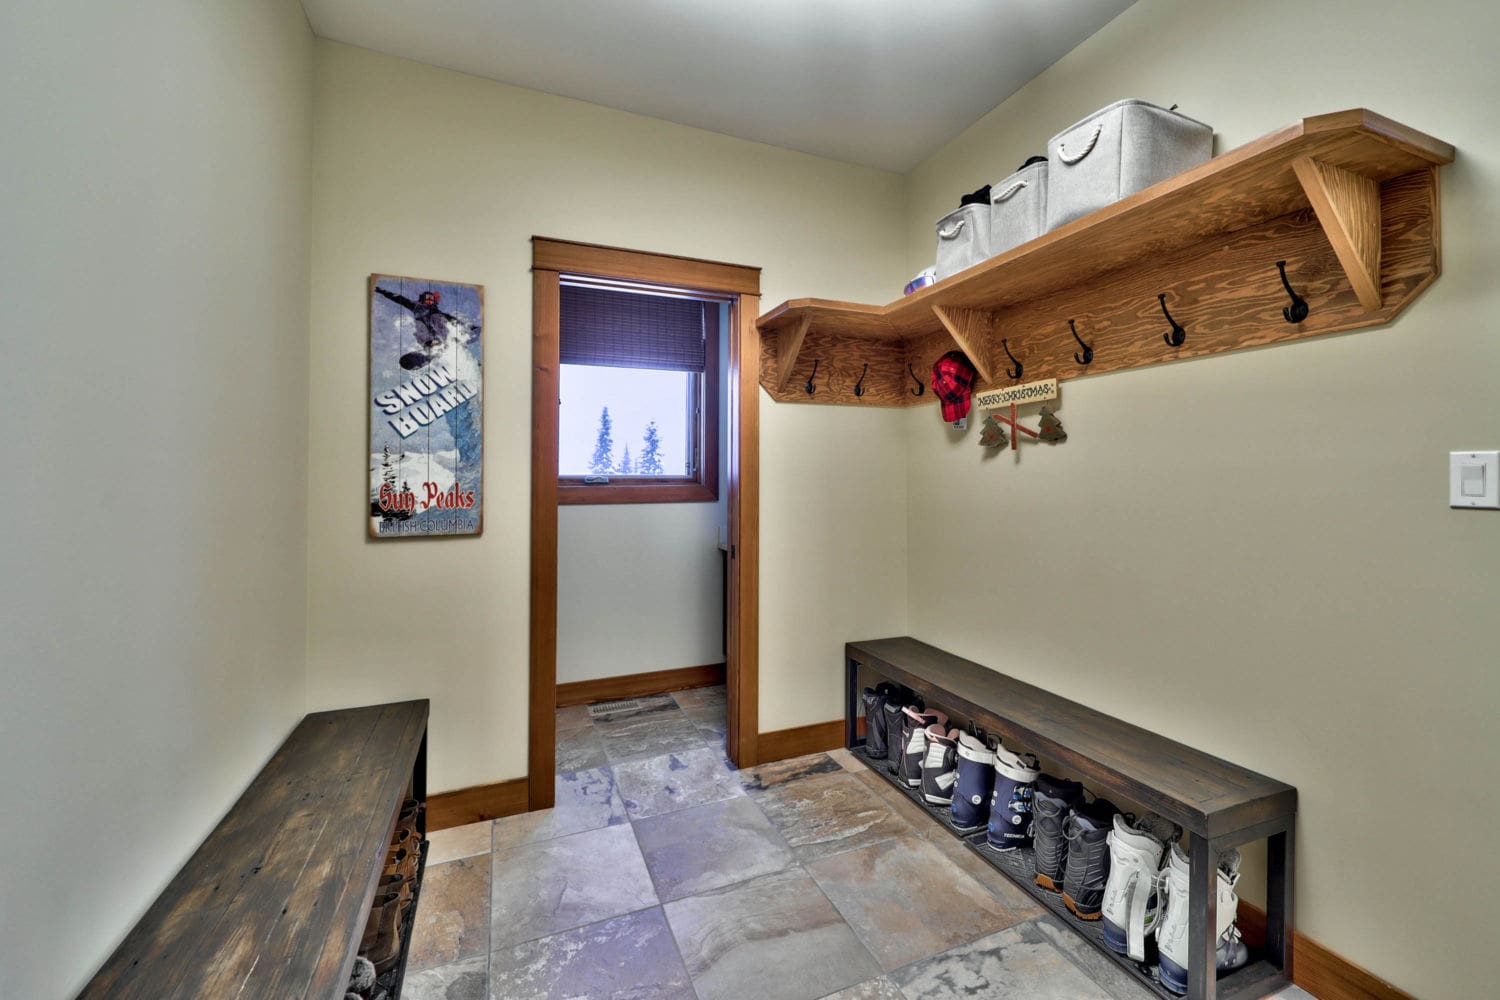 Mudroom in a timber frame log home